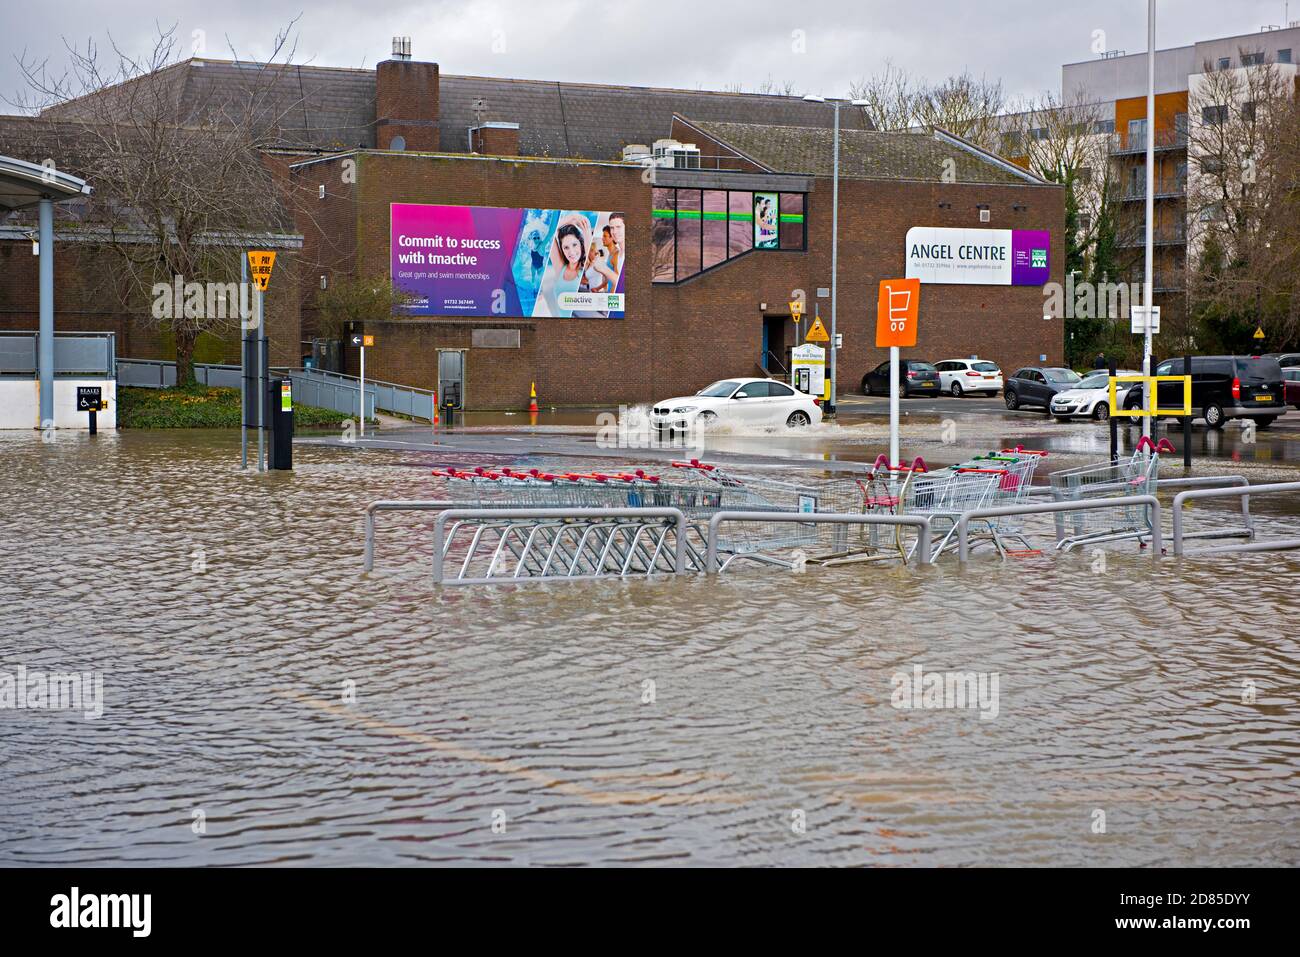 The Angel Centre car park in Tonbridge, UK flooded following heavy rain and overtopping of the River Medway that runs through the town Stock Photo